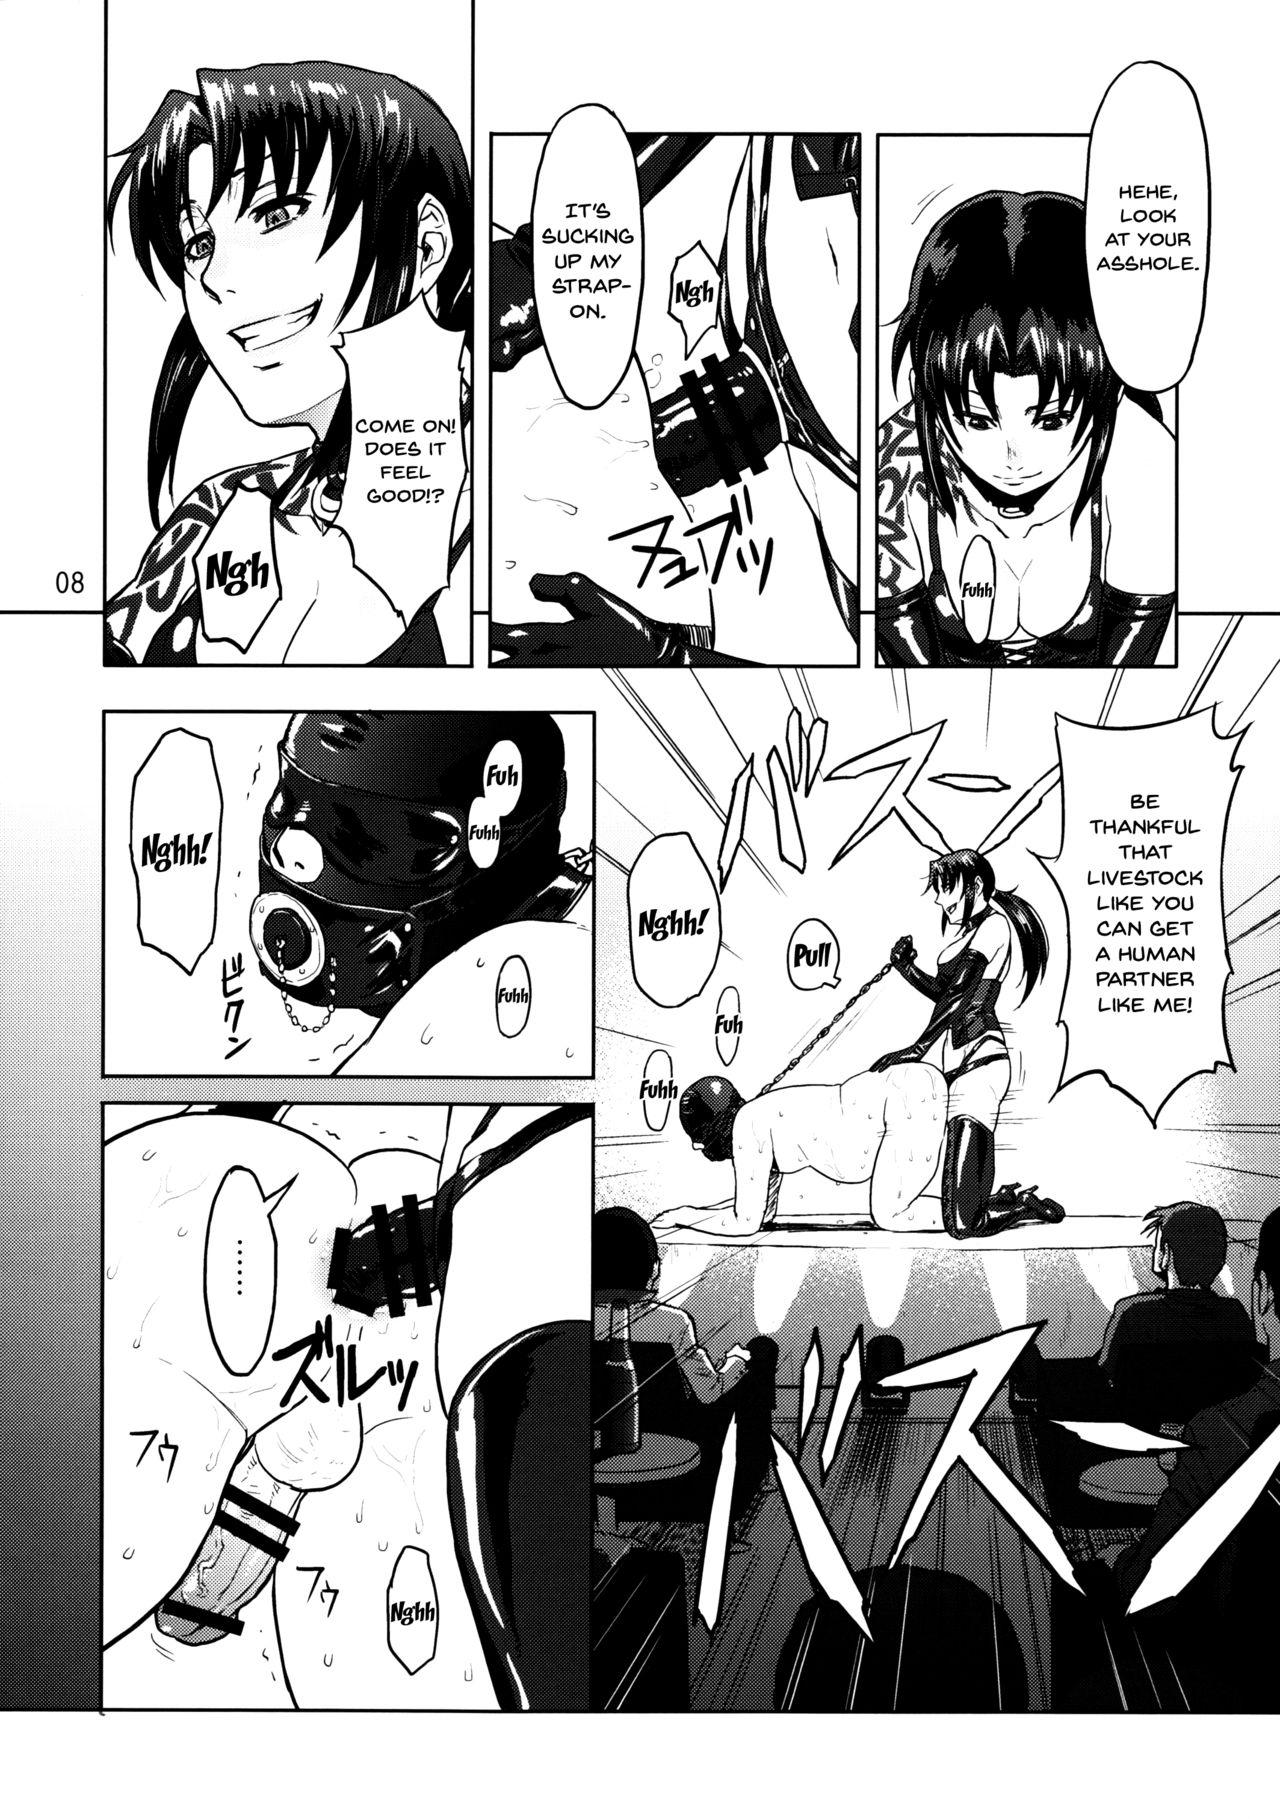 Indonesian Dressing Room - Black lagoon Amatures Gone Wild - Page 8